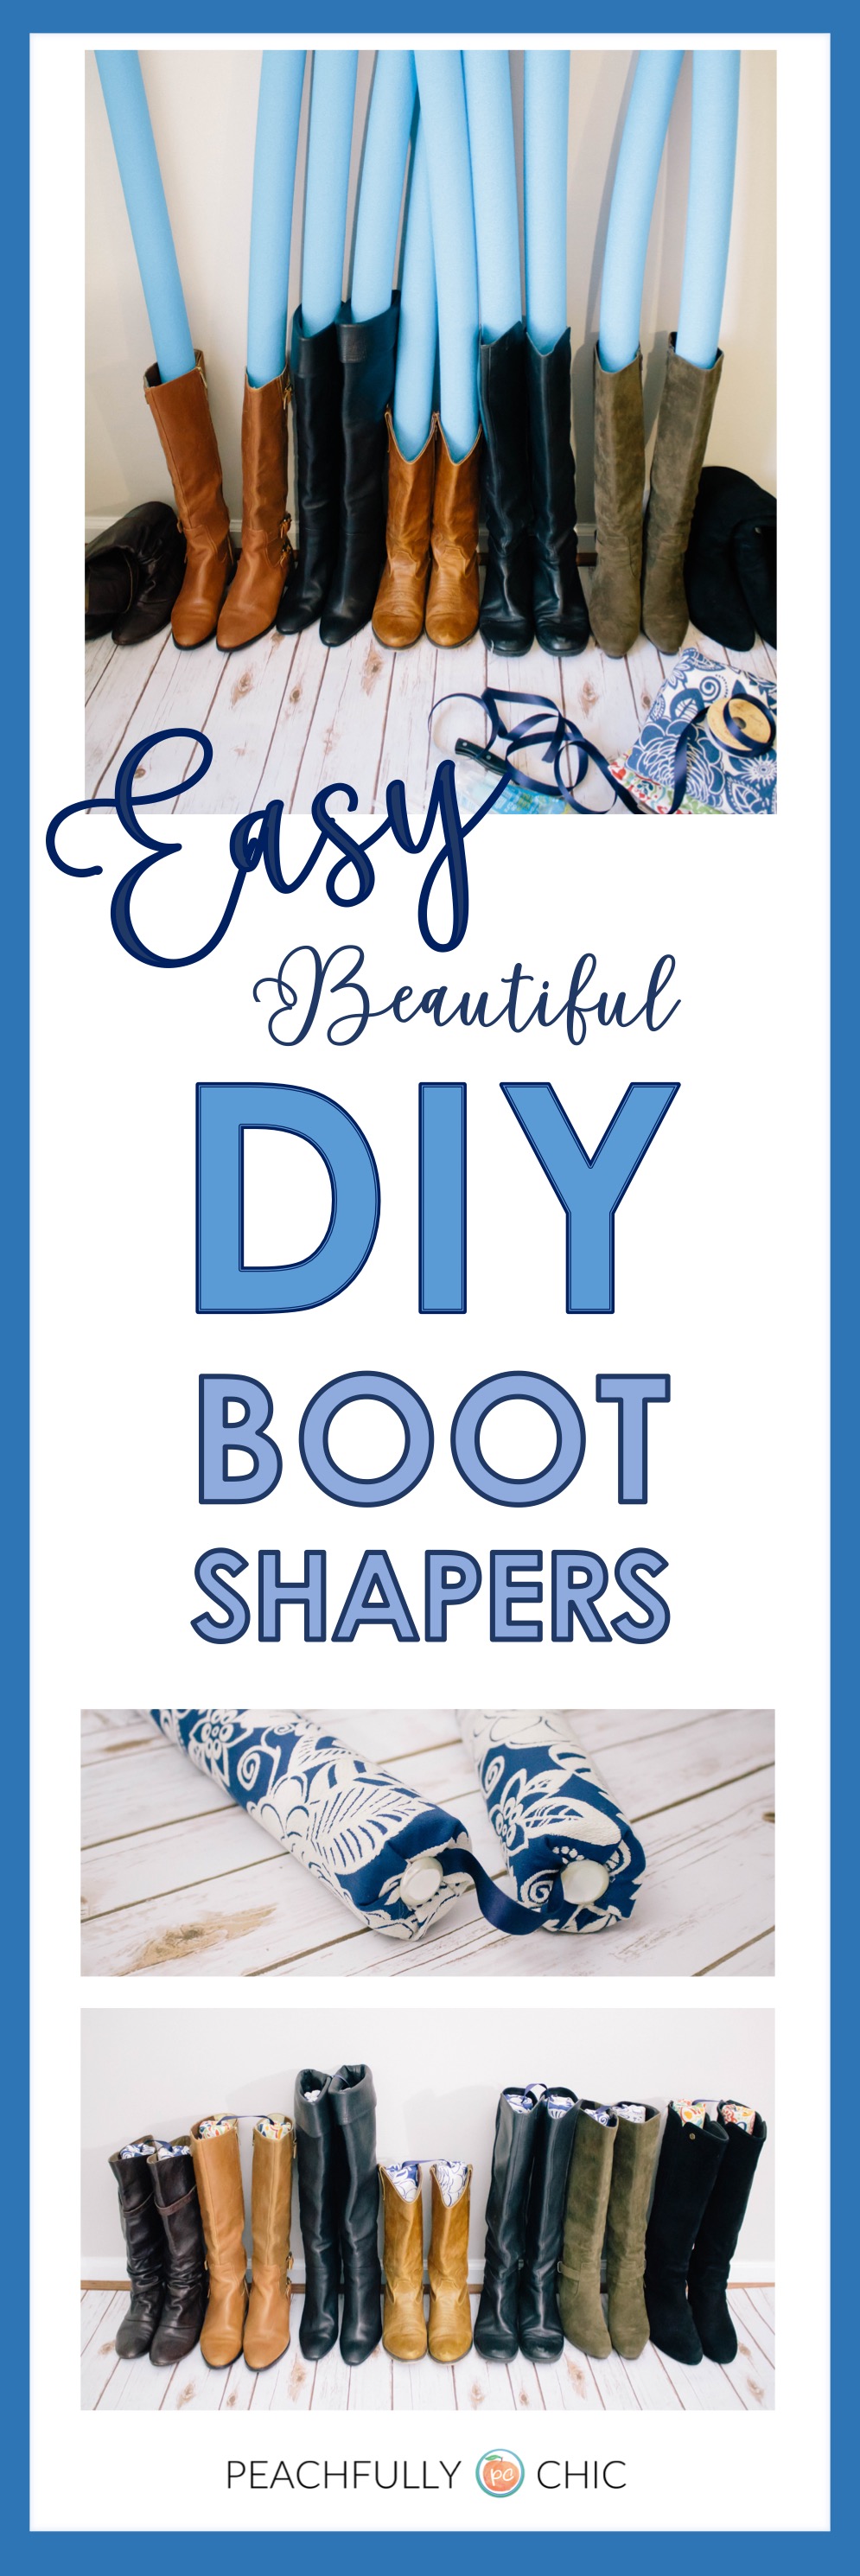 Easy DIY Boot Shapers - Peachfully Chic